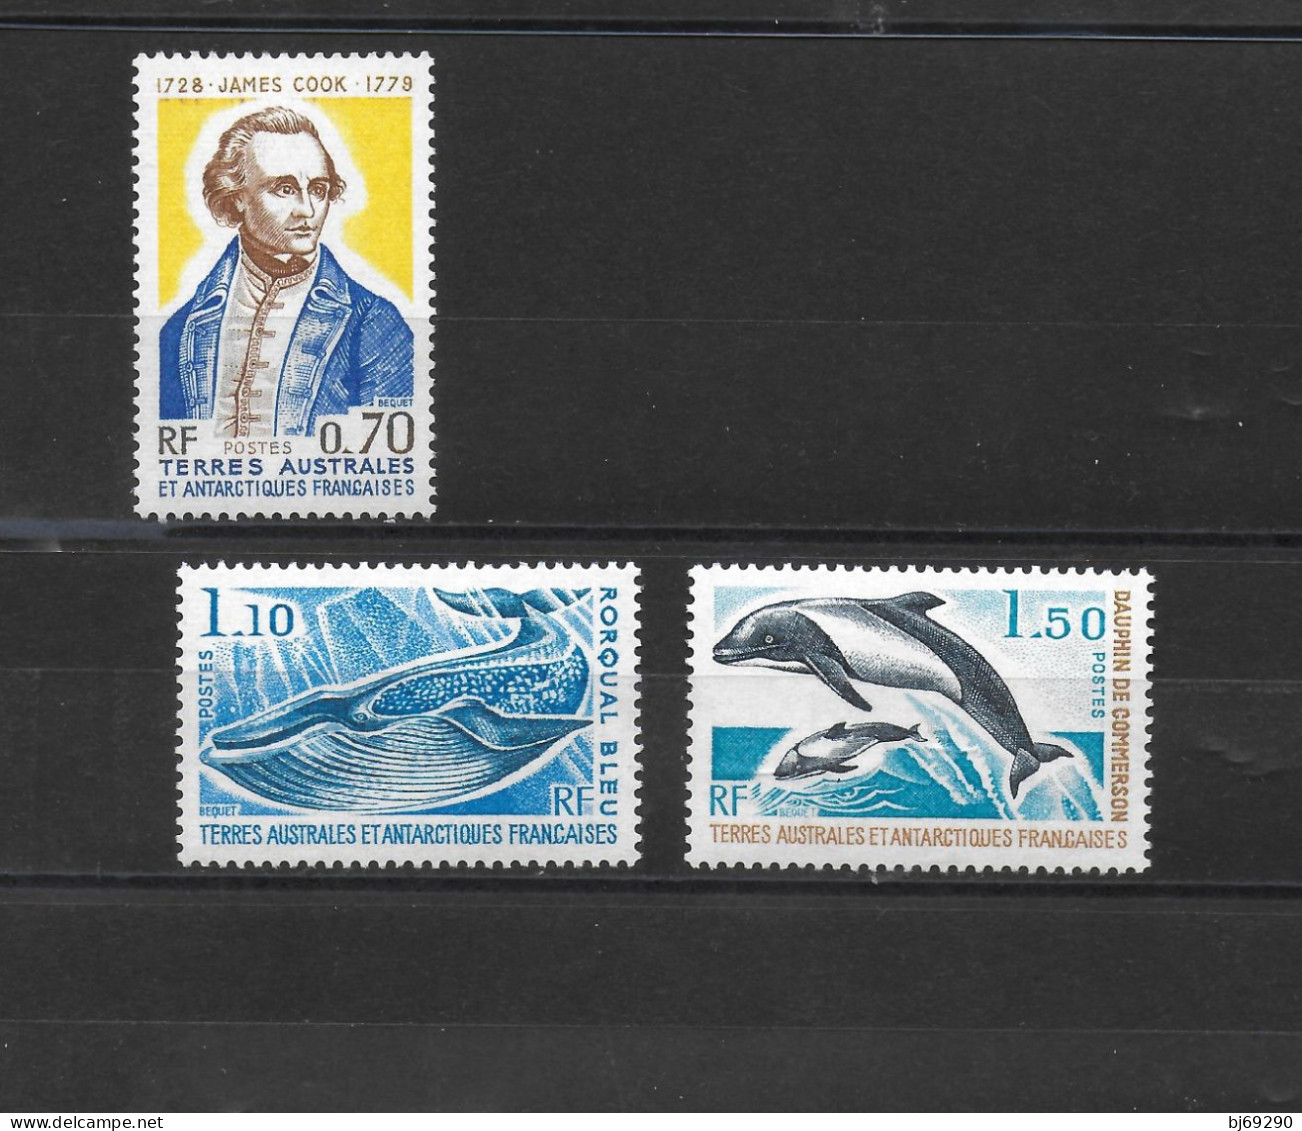 TAAF - 1976 - 77 : Timbres 63-64-65 Neufs ** - Nuovi